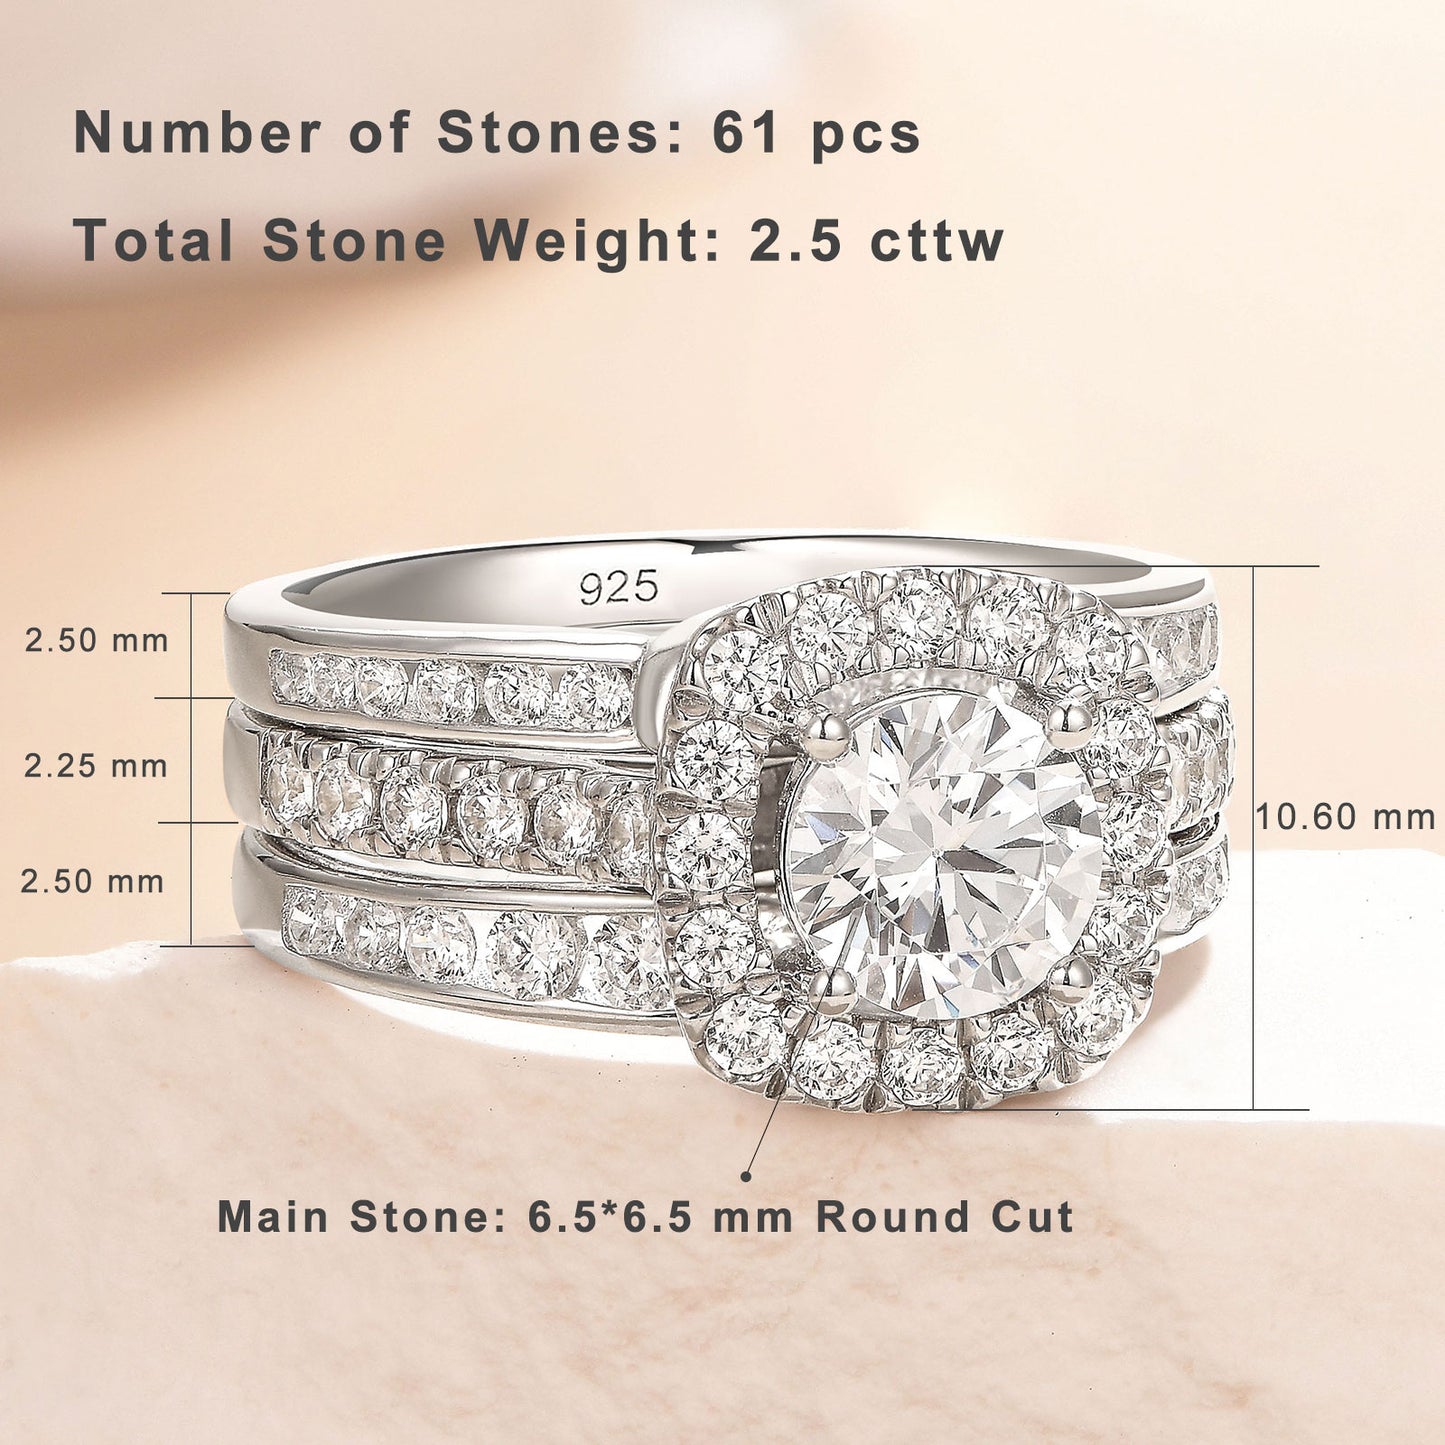 Newshe Jewellery Wedding Rings for Women AAAAA Cz 925 Sterling Silver Engagement Bridal Band Set Enhancers and Wraps Size 5-10